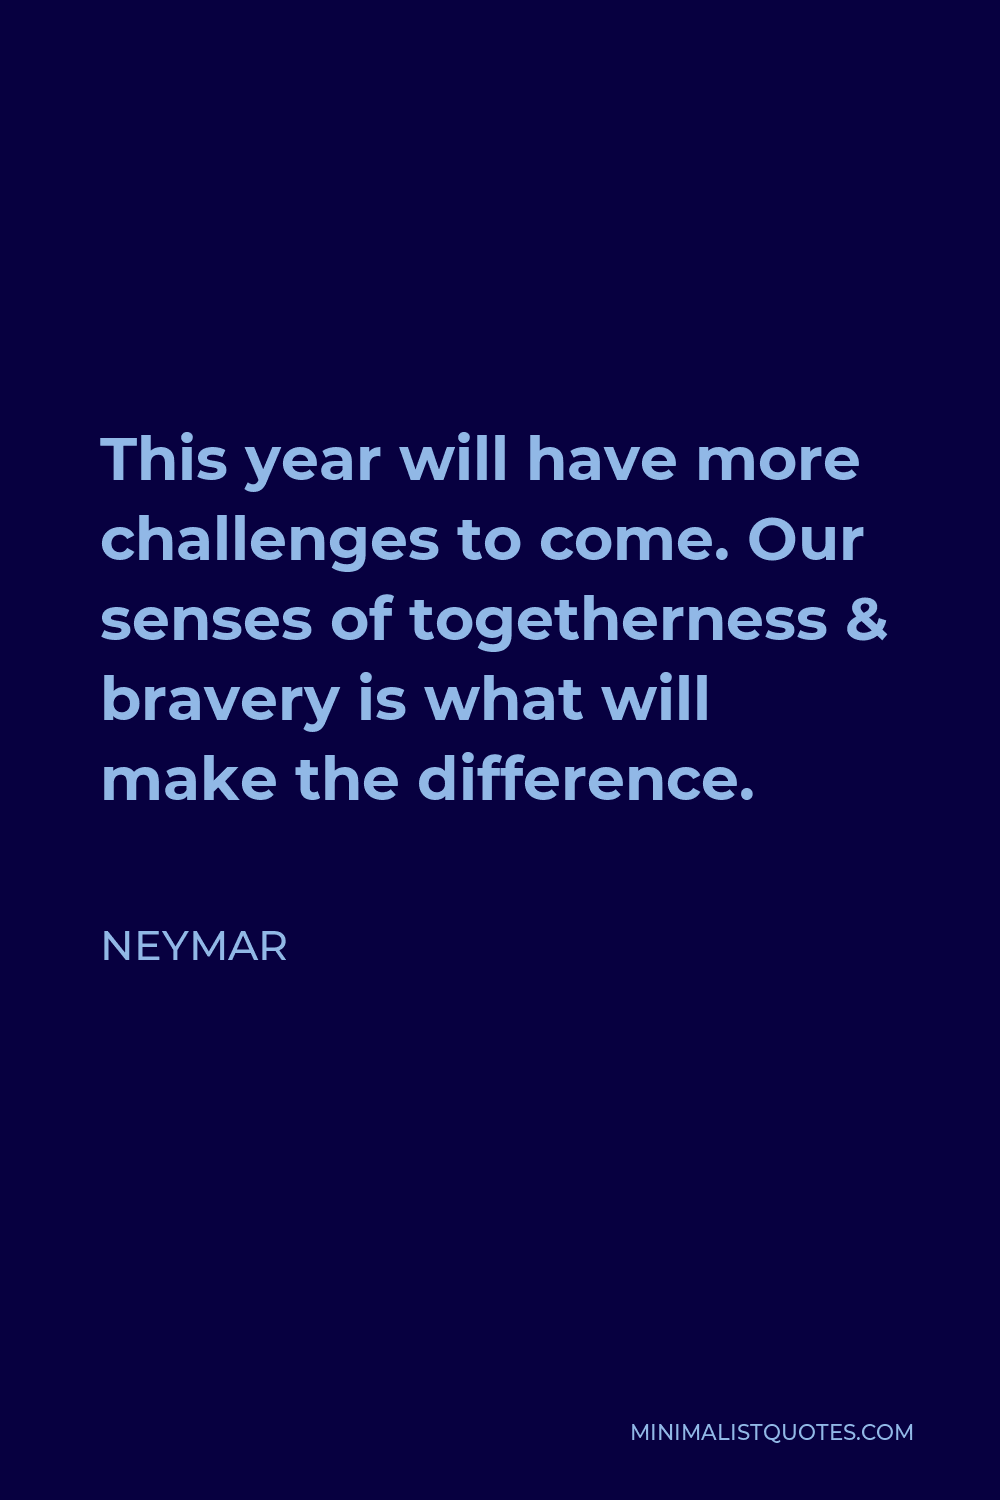 Neymar Quote - This year will have more challenges to come. Our senses of togetherness & bravery is what will make the difference.